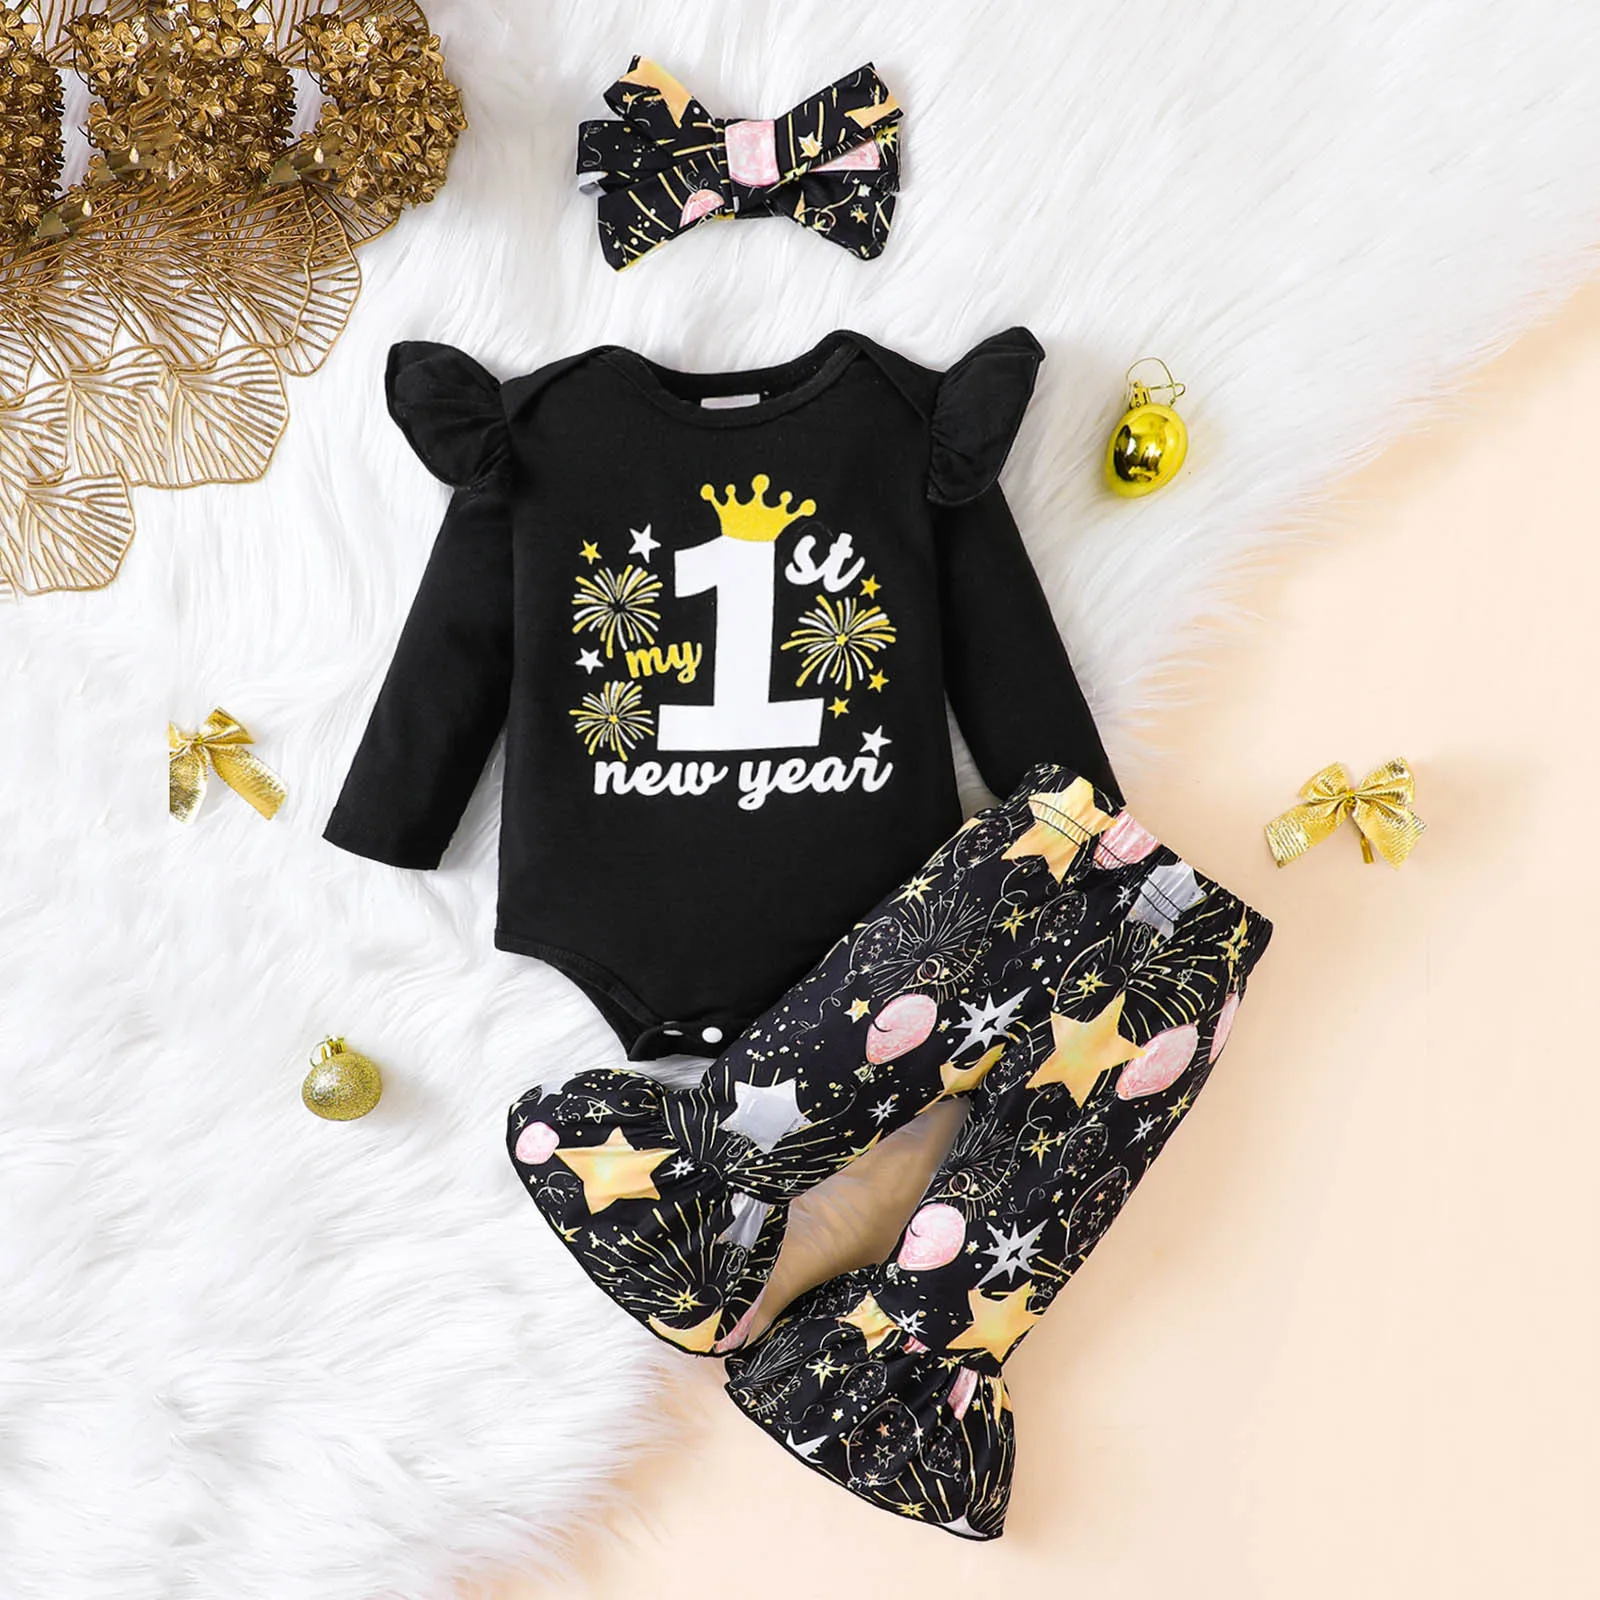 

Baby Girls Autumn Winter Clothes Sets Long Sleeve Letter Prints Romper Pants Headbands 3PCS Outfits New Year Clothes Sets 0-24M